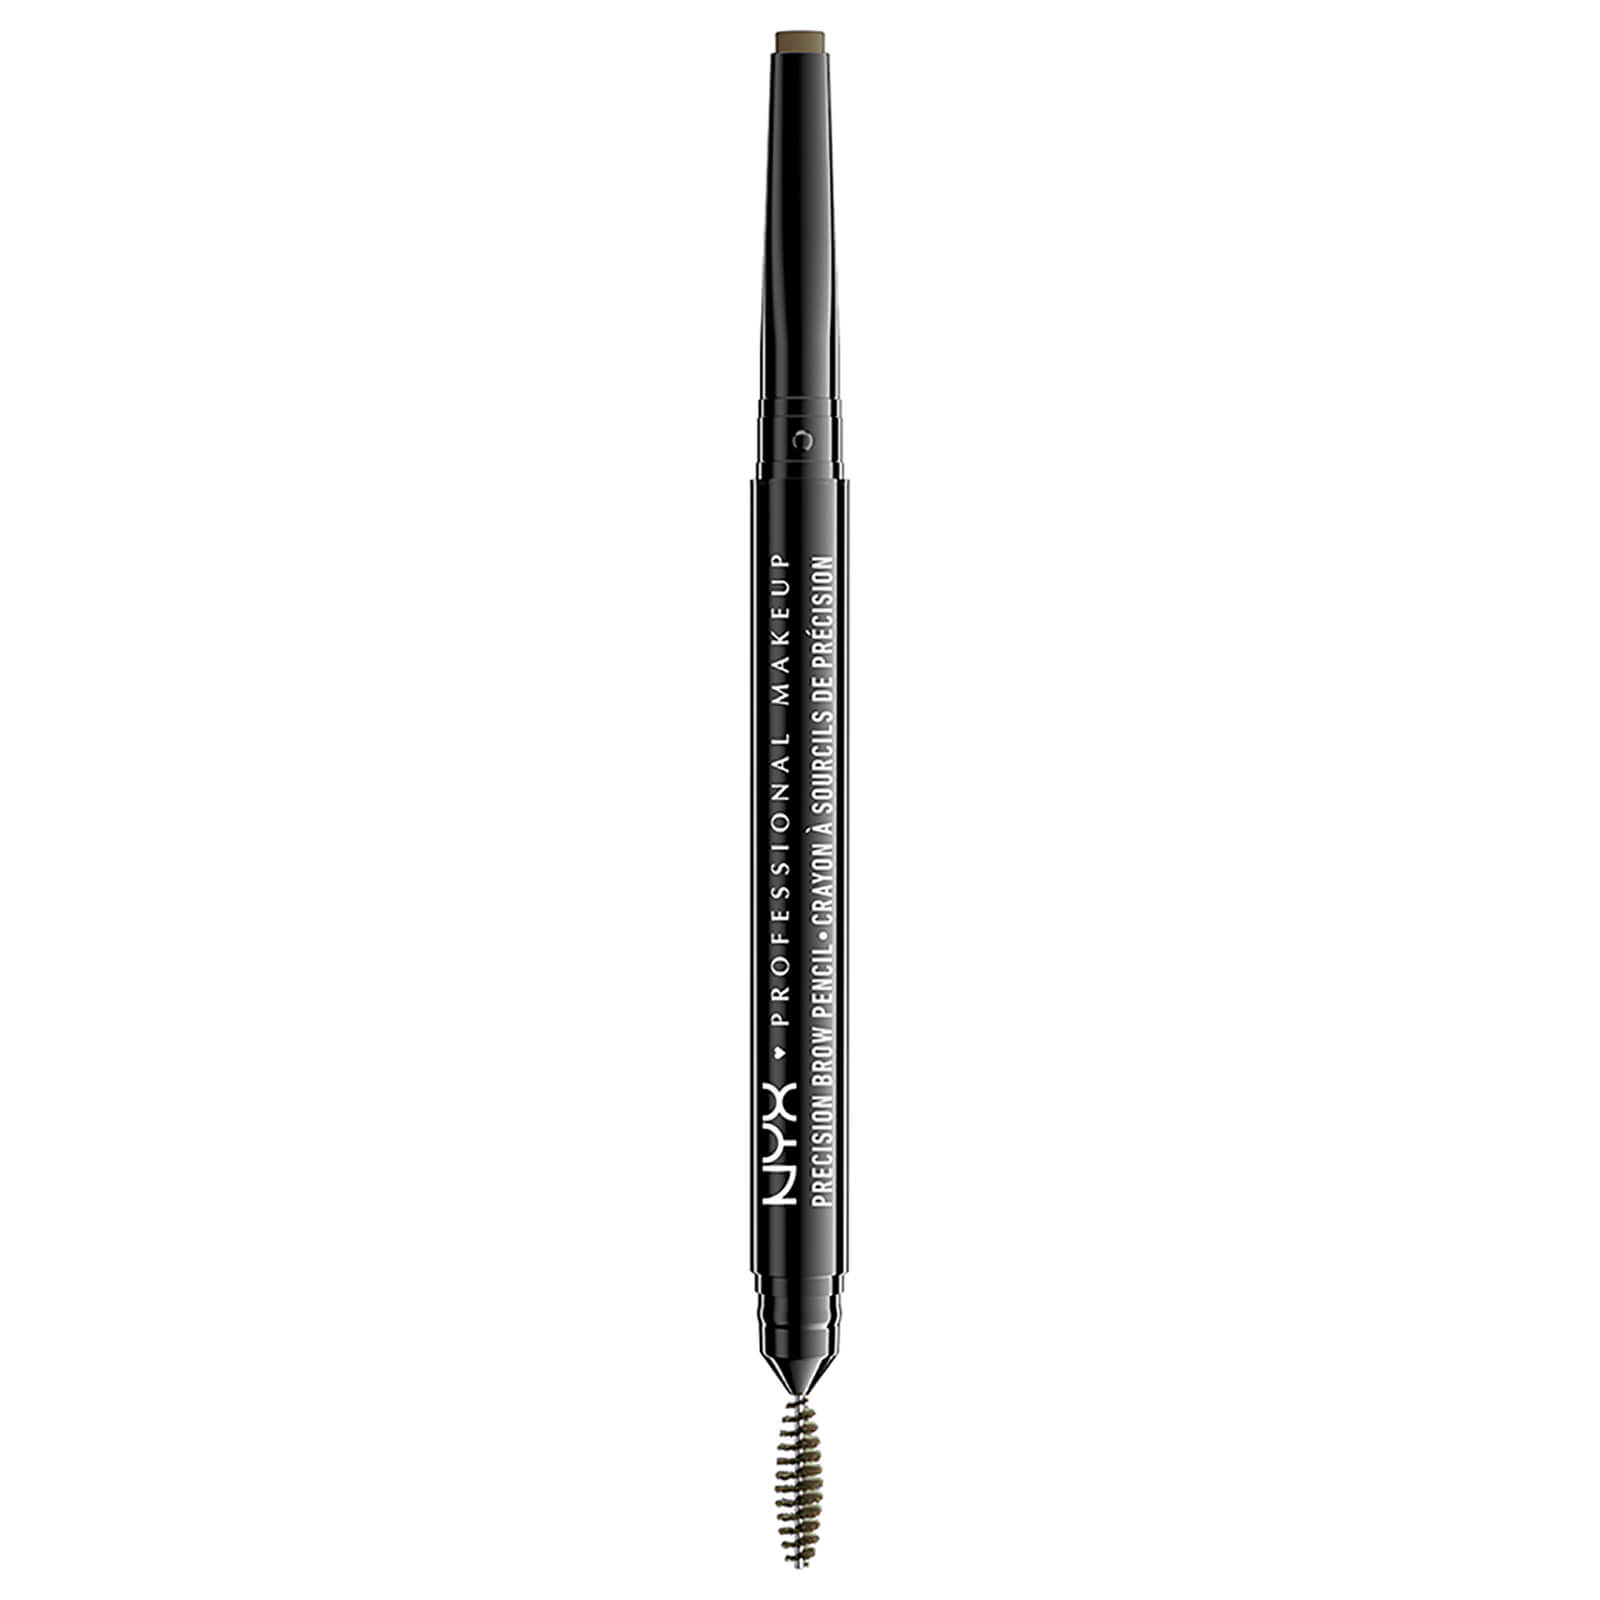 Image of NYX Professional Makeup Precision Brow Pencil 9.3g (Various Shades) - Taupe